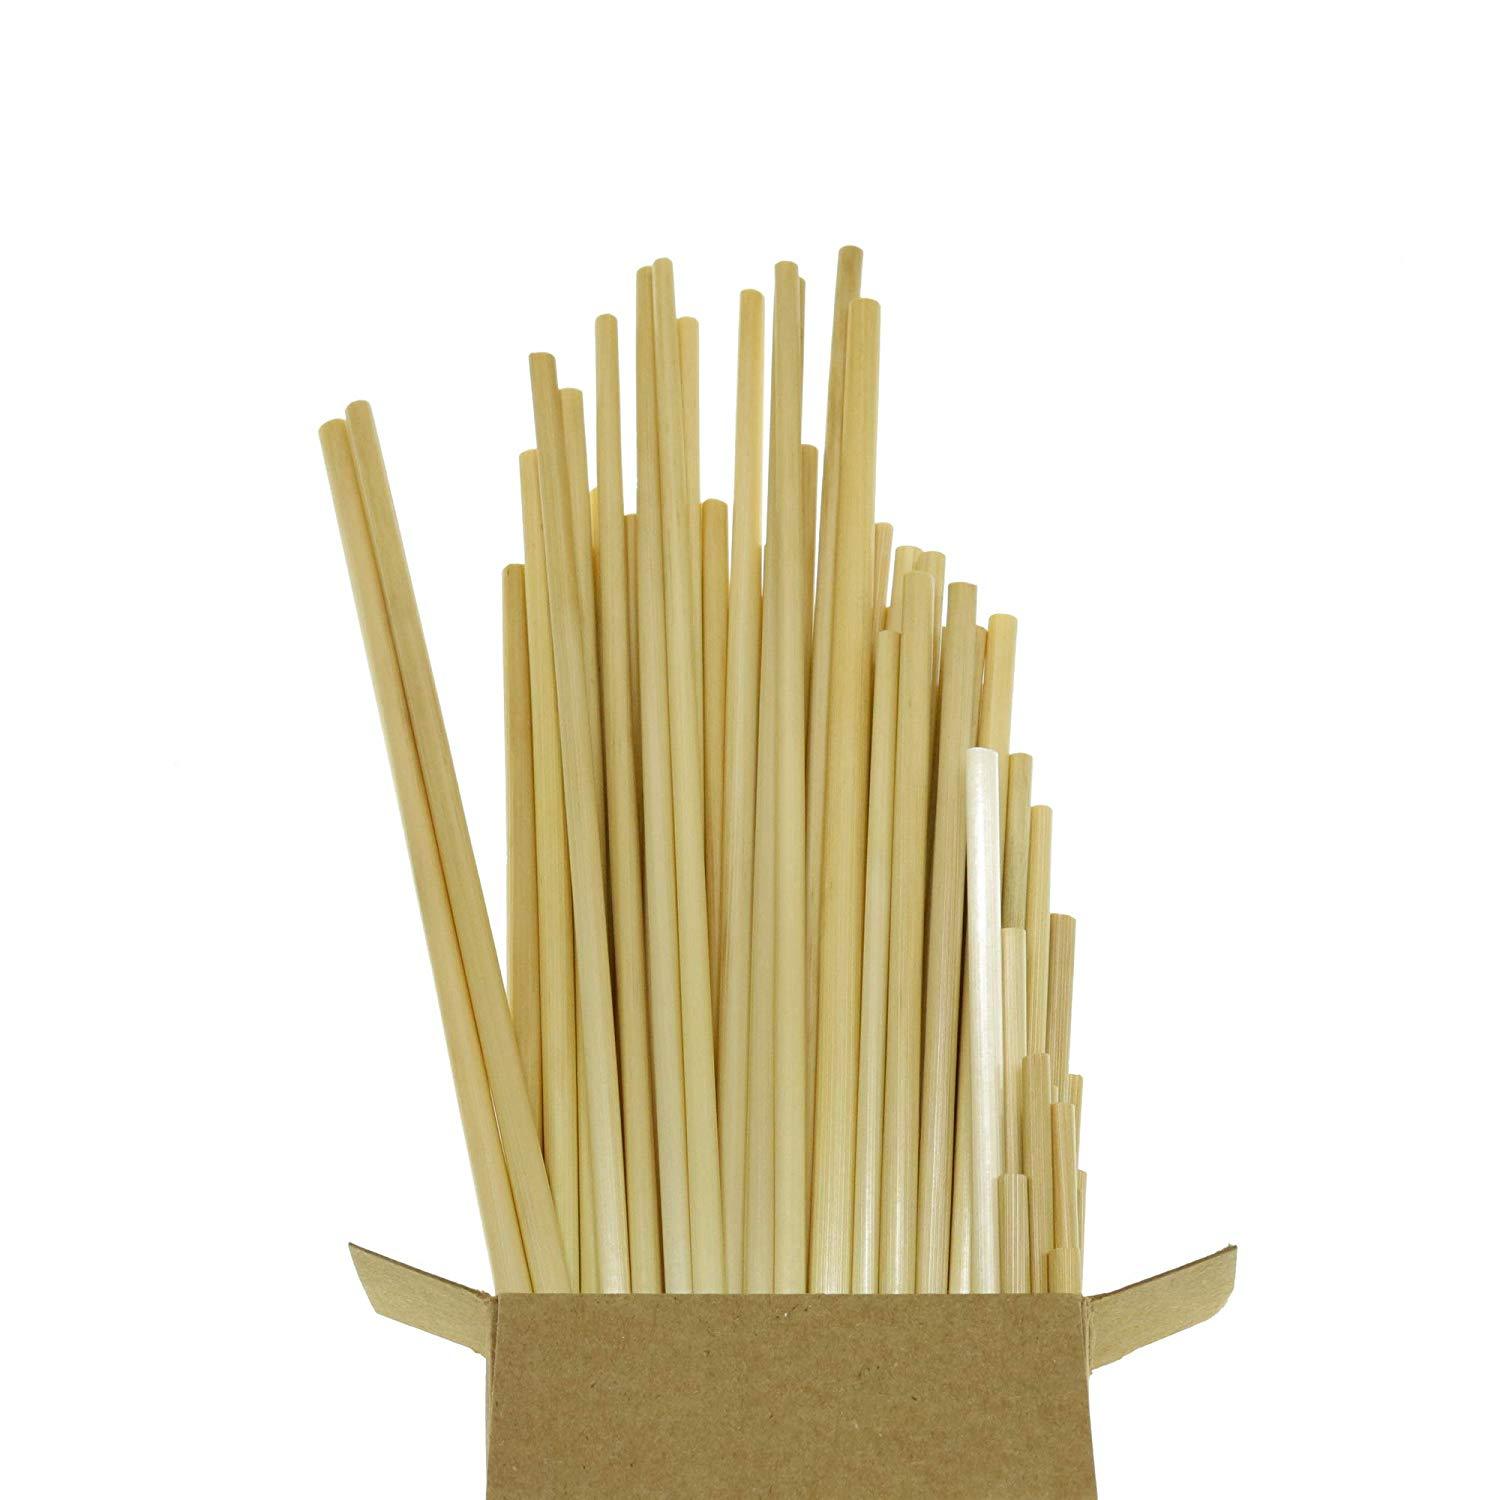 What kind of straw is good for the environment？